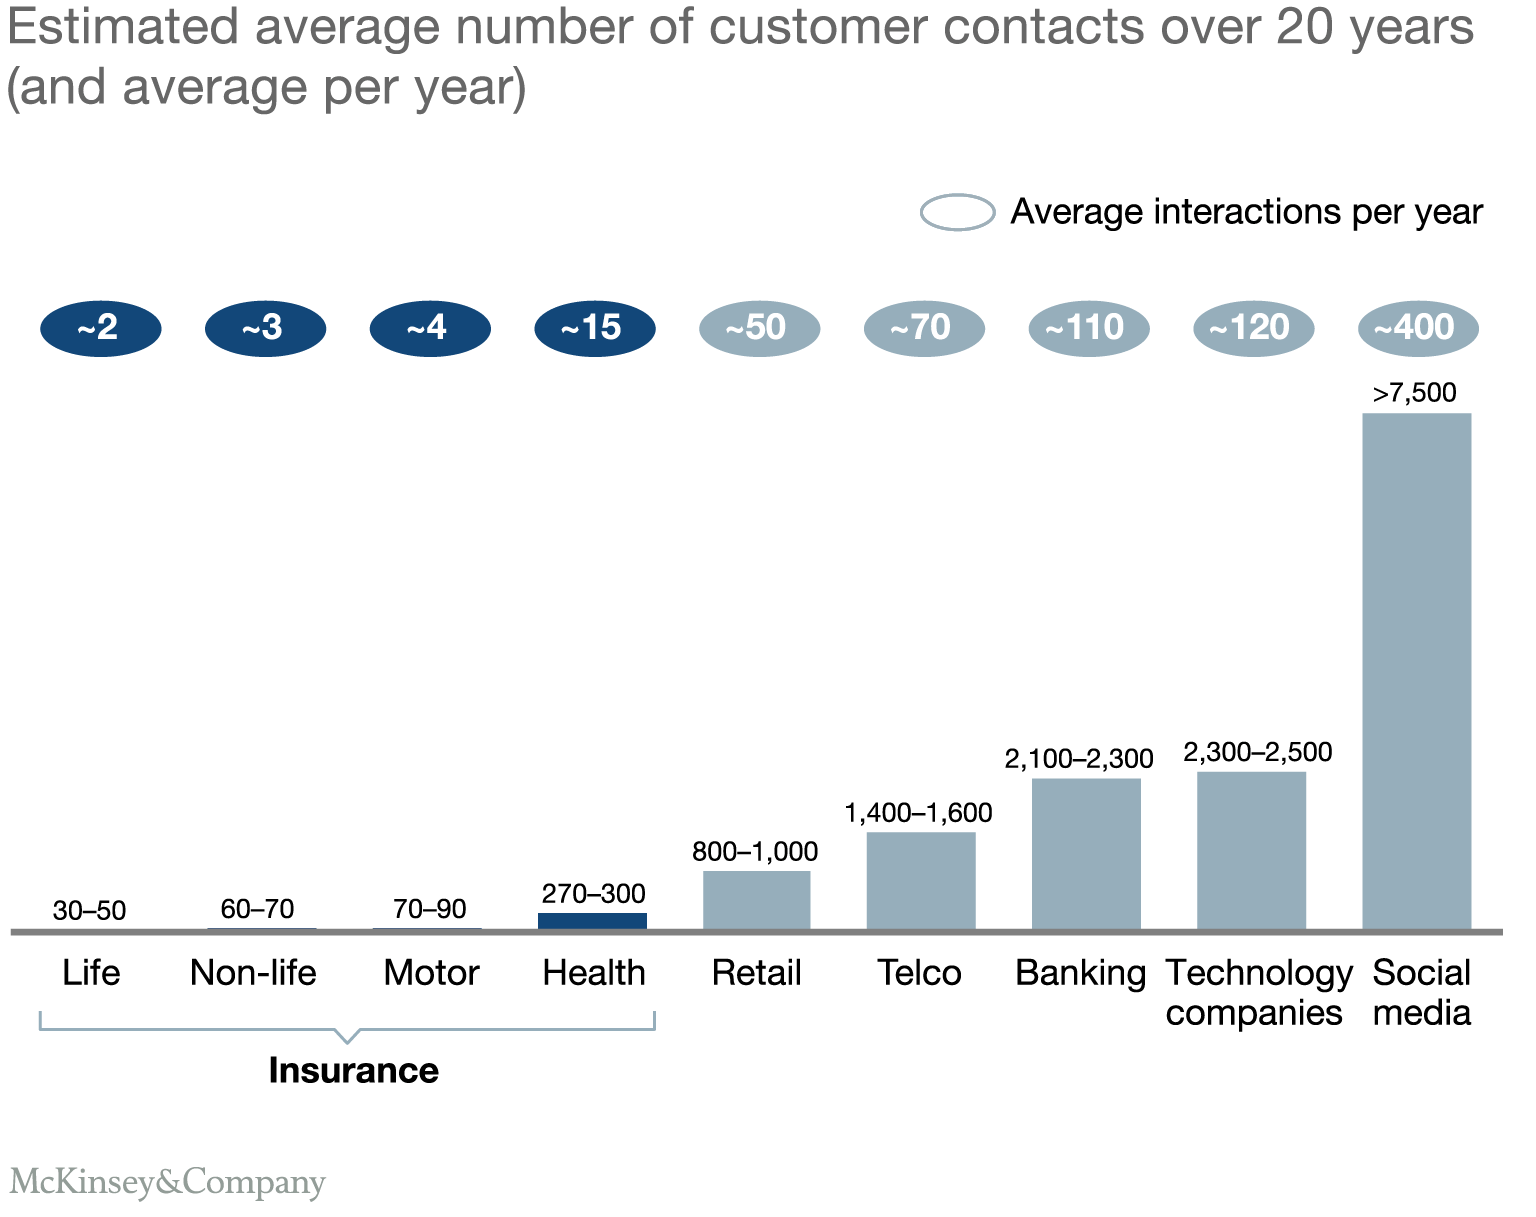 Estimated average number of customer contacts over 20 years and average per year